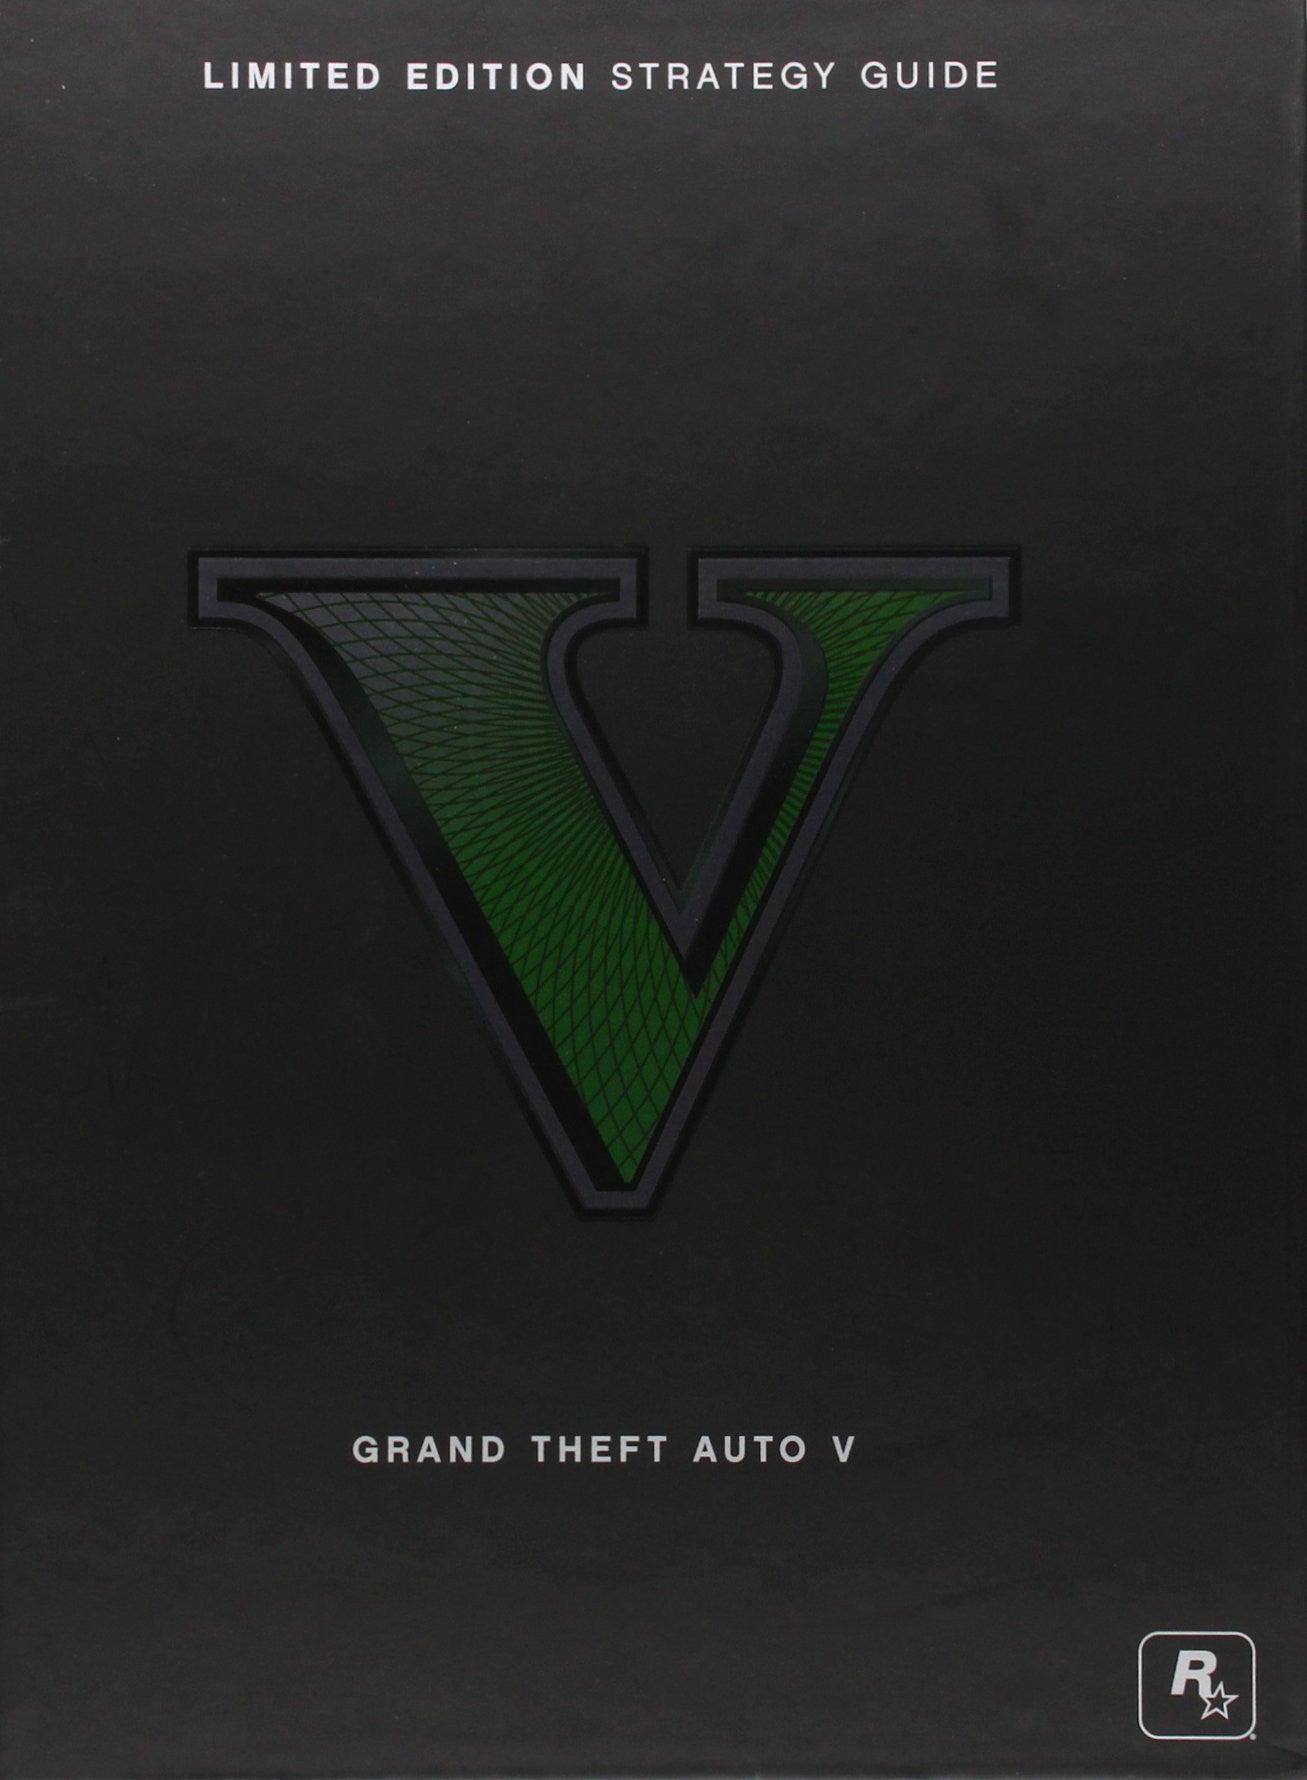 Grand Theft Auto V Limited Edition (Bradygames Strategy Guides) Hardcover